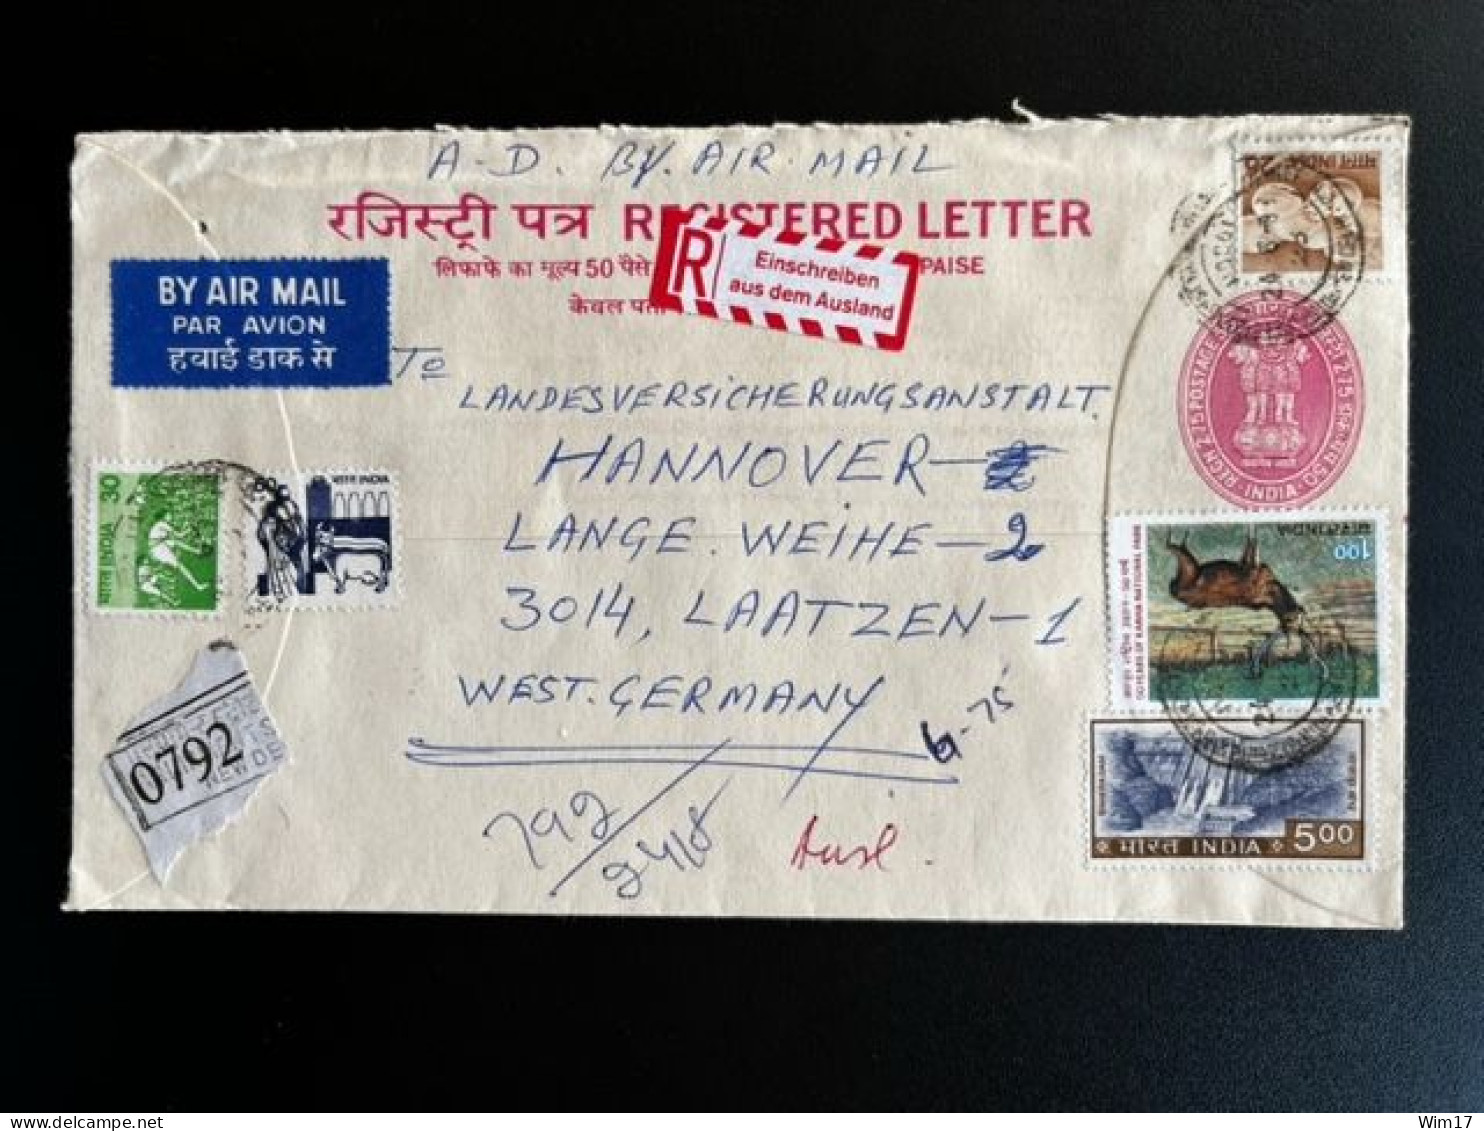 INDIA 1983 REGISTERED LETTER NEW DELHI TO LAATZEN GERMANY 24-08-1983 - Covers & Documents